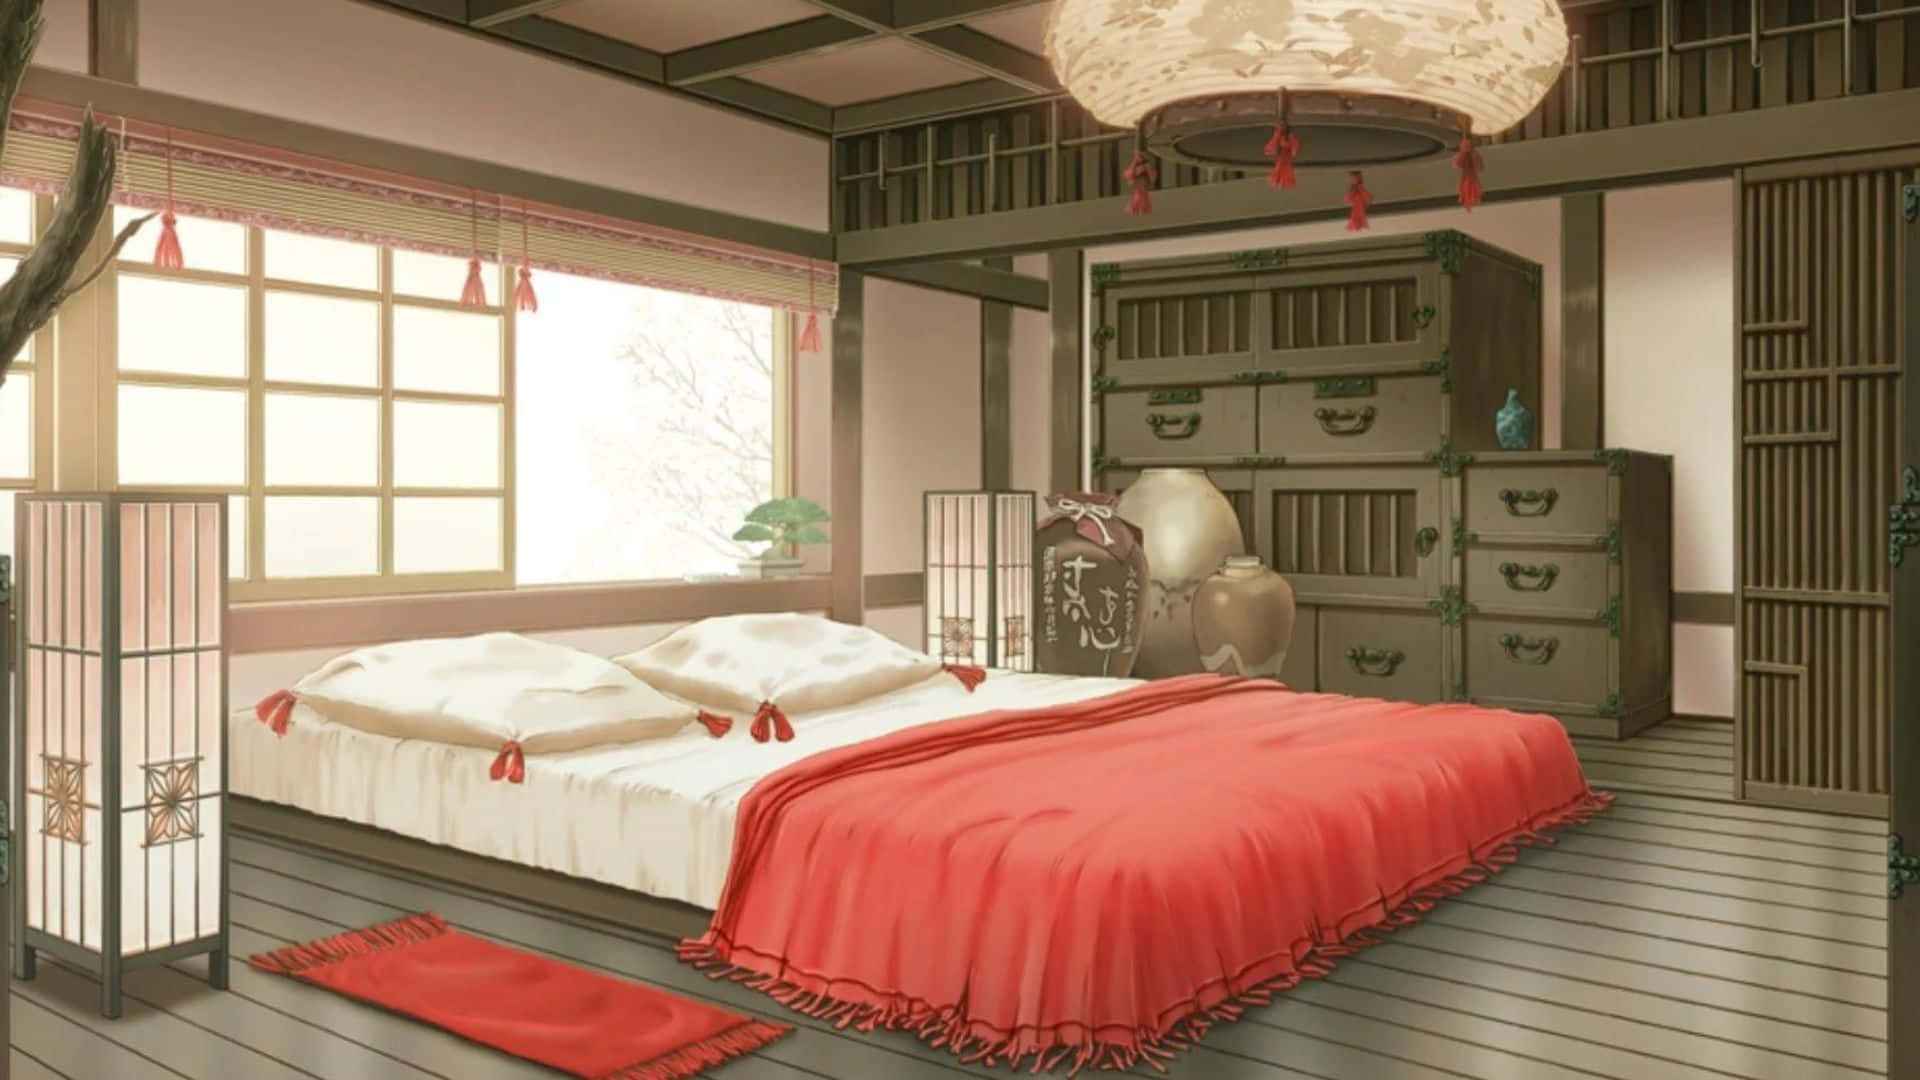 Transform your bedroom into an anime-inspired sanctuary